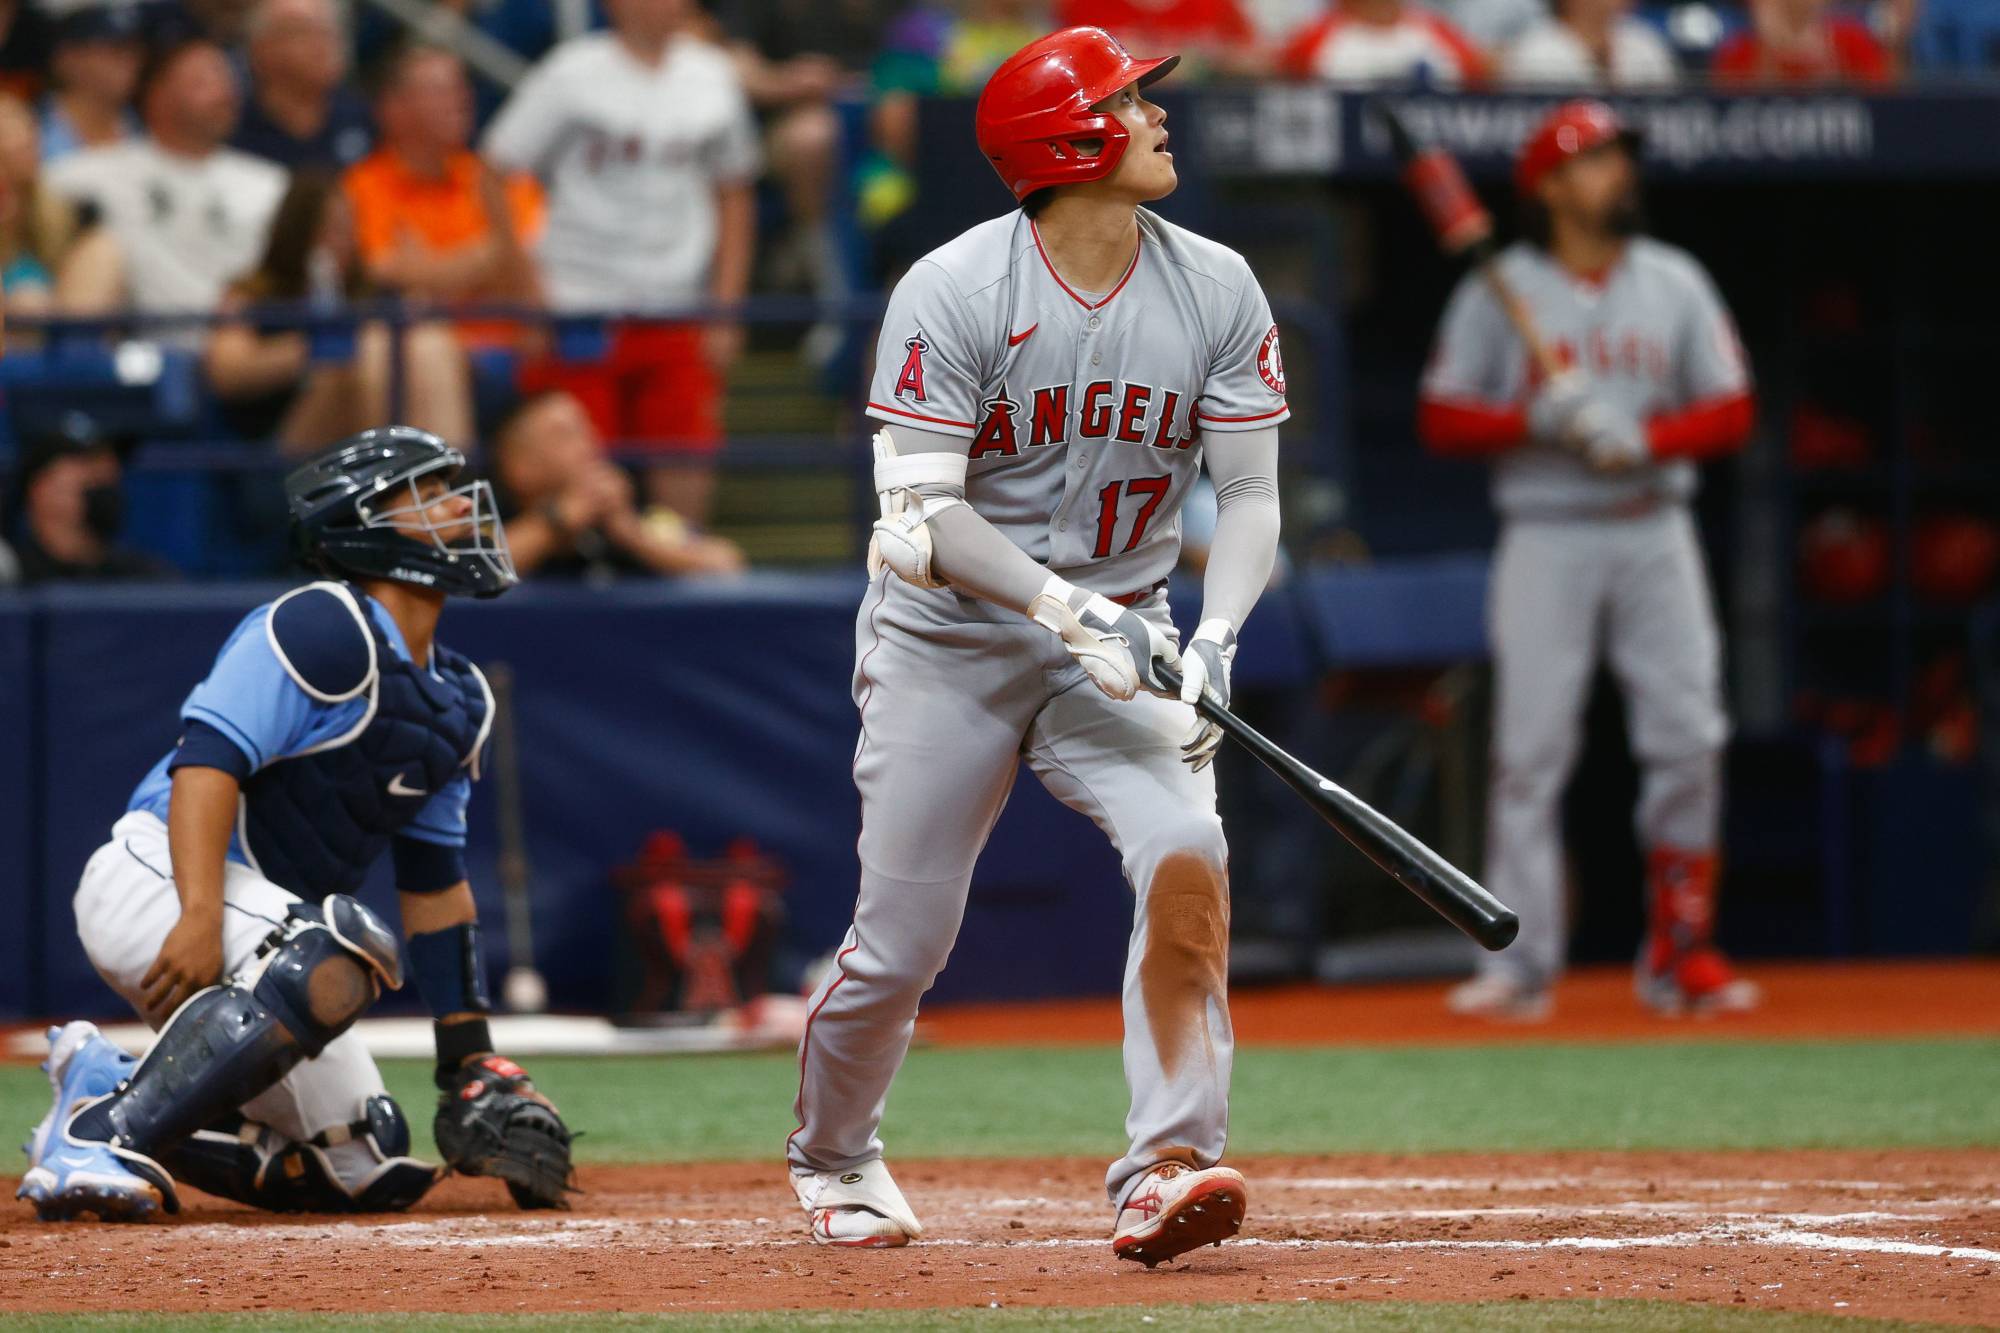 The Shohei Ohtani Sweepstakes and how the Rays can win it